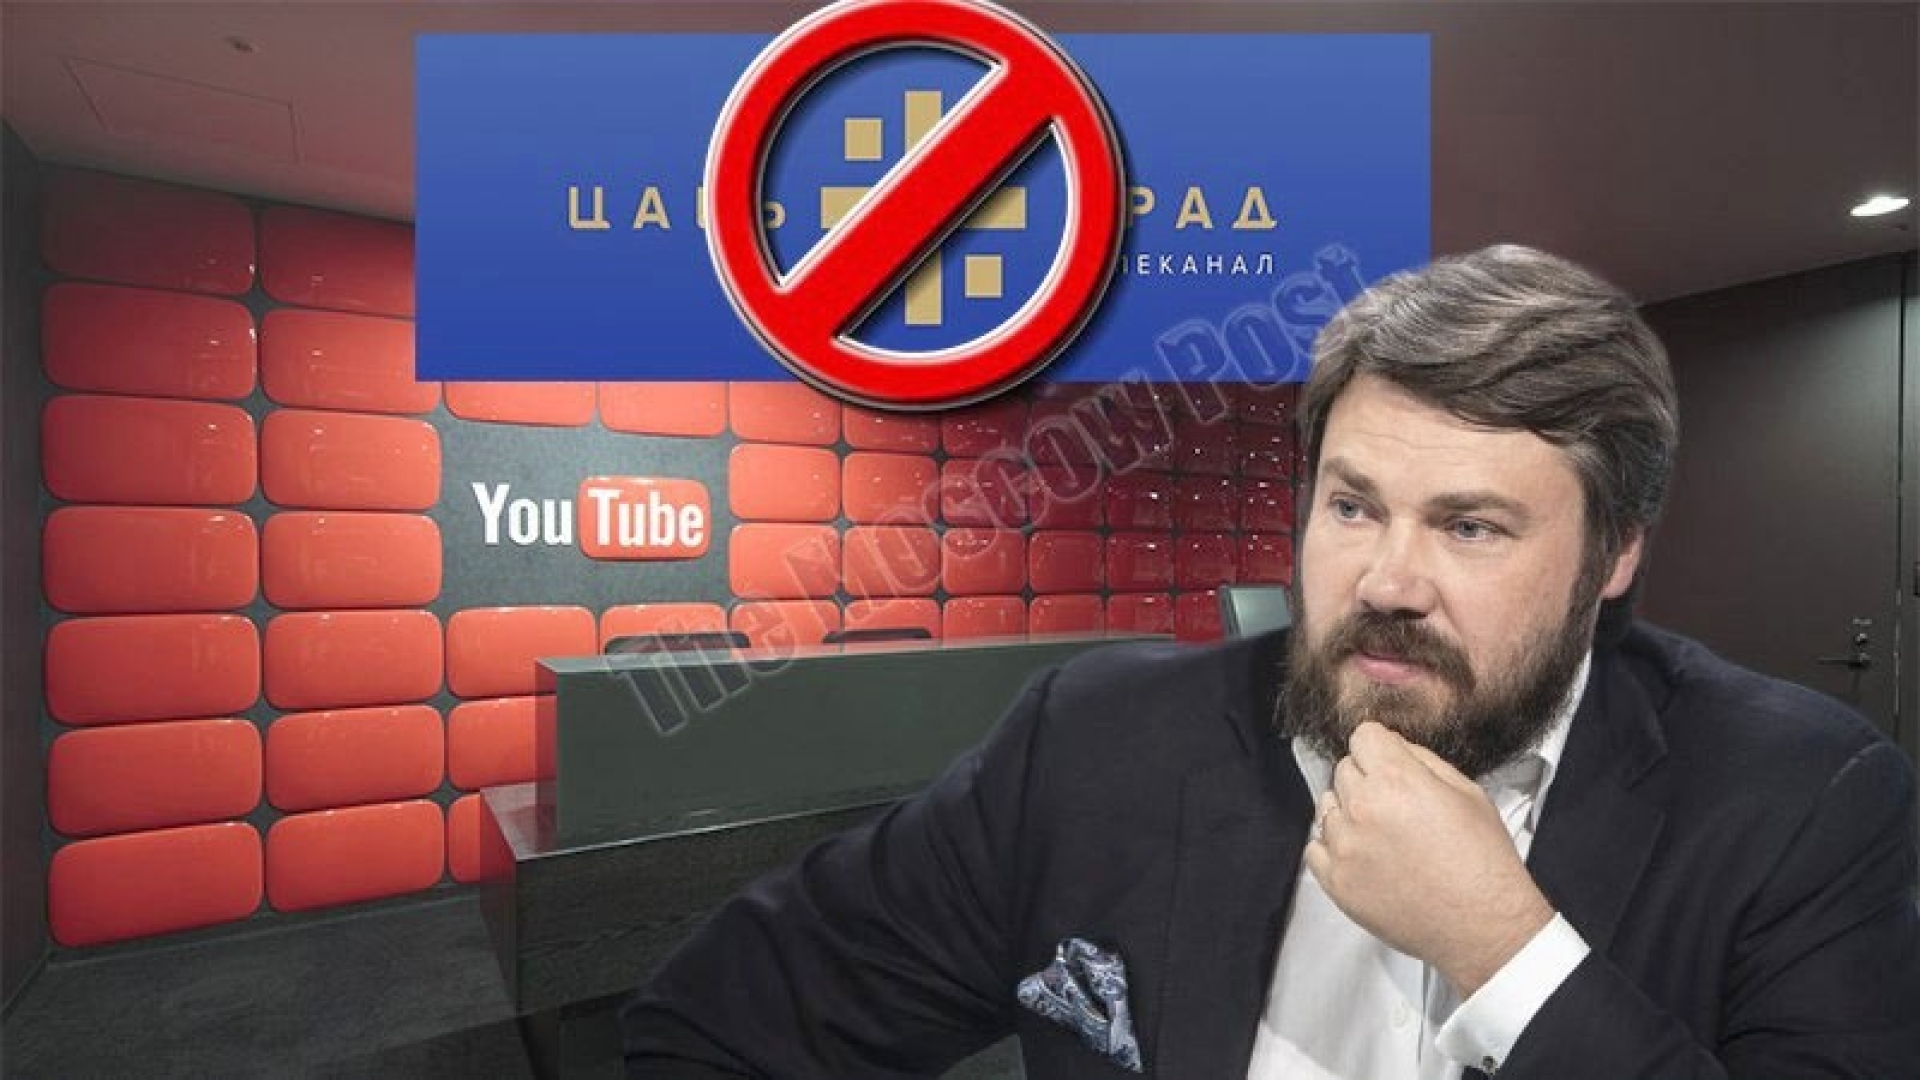 "Cyber monarchy" of Malofeev: for Faith, Tsar and YouTube